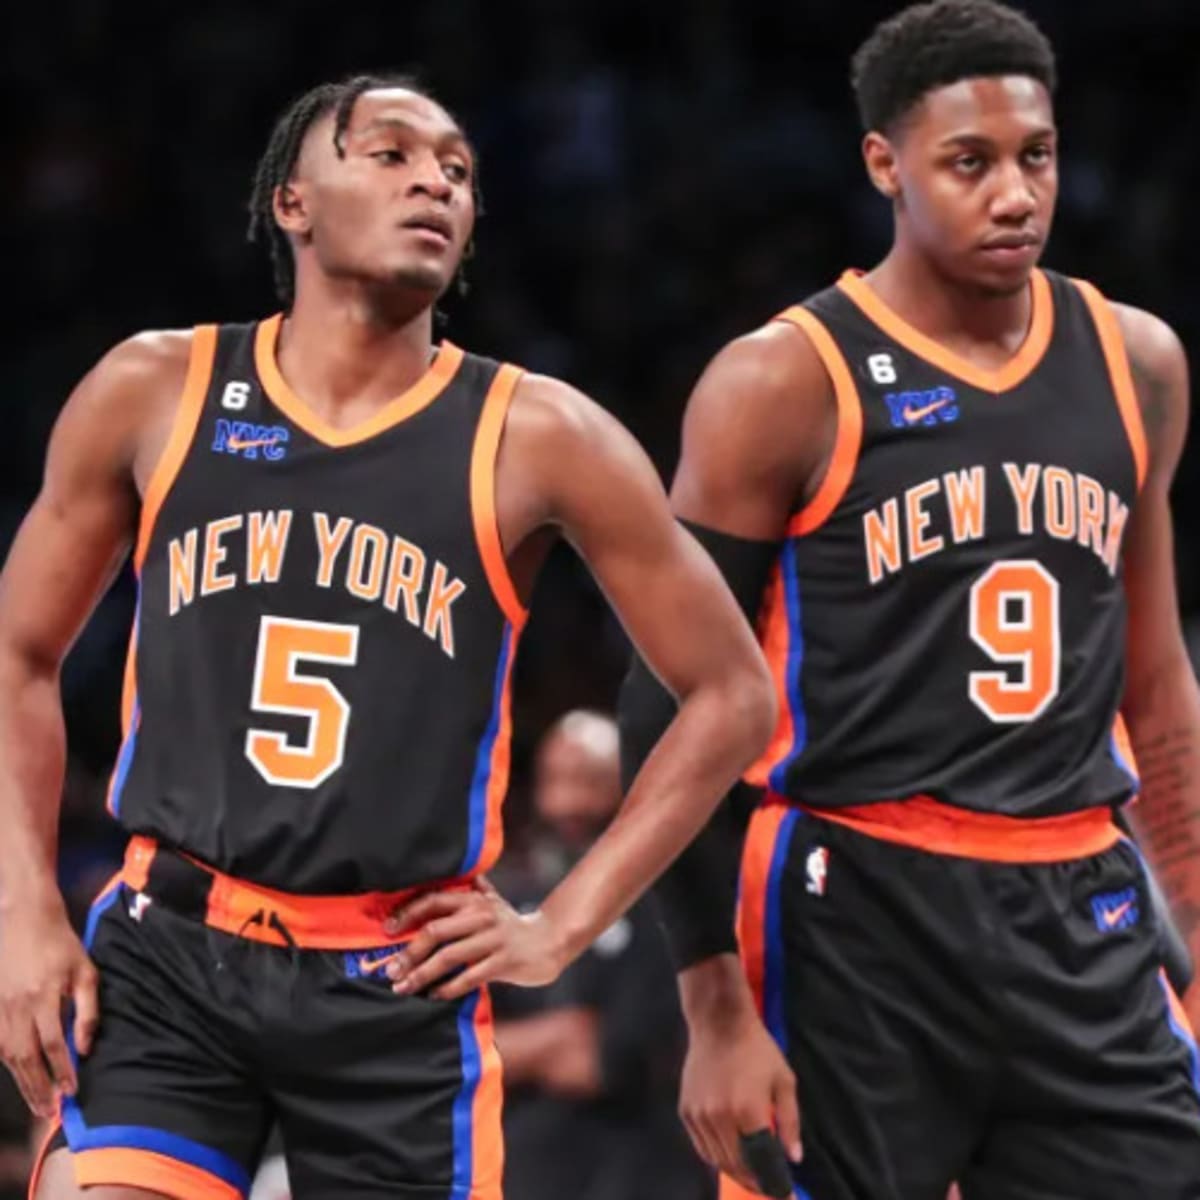 Knicks Trading Barrett, Quickley Continues Troubling New York